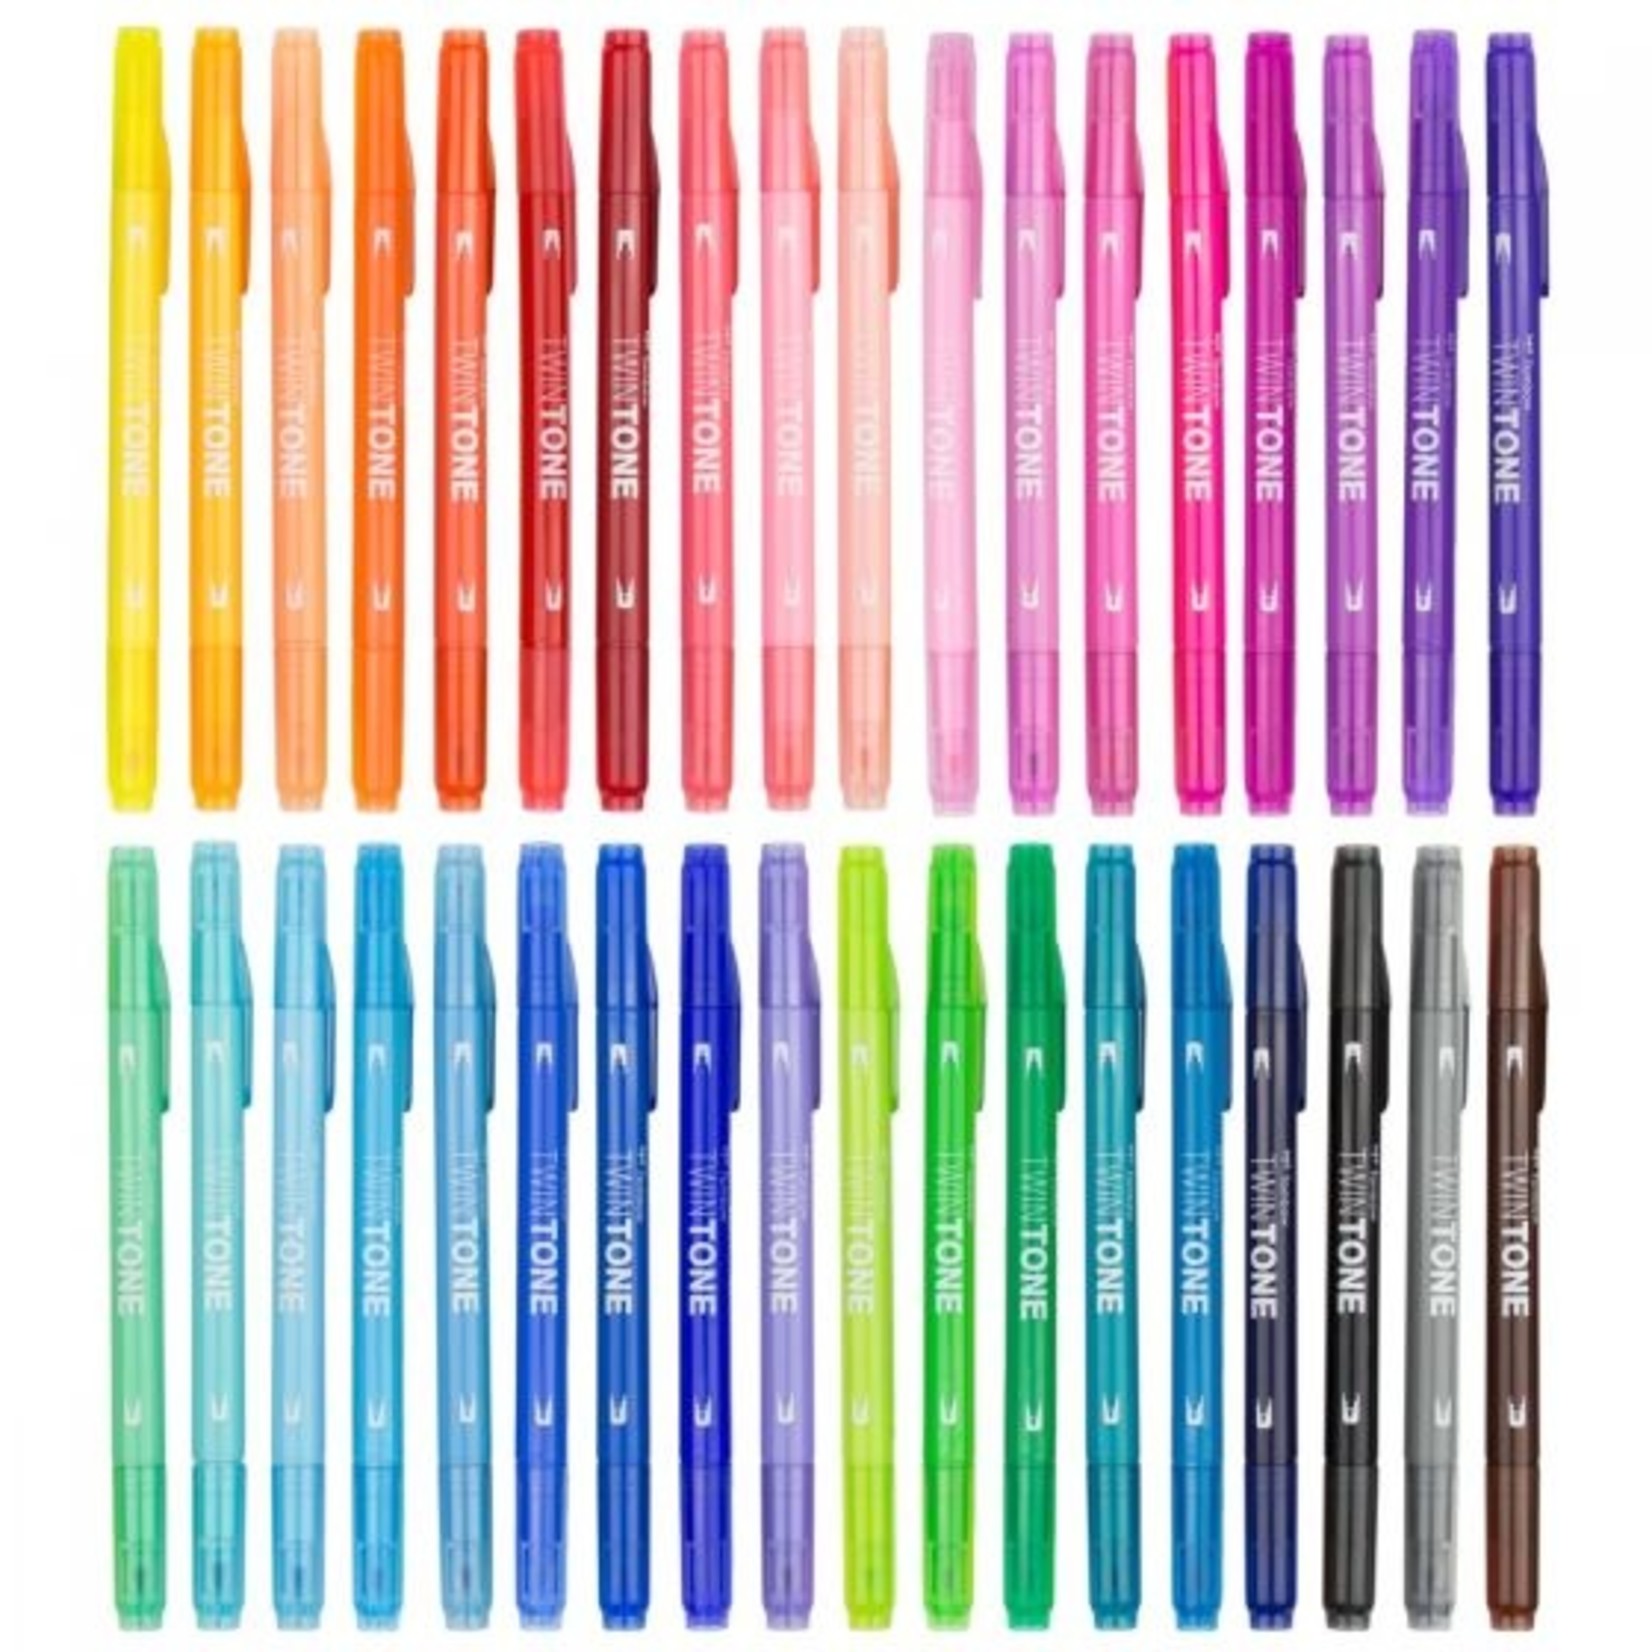 TOMBOW TWIN-TONE DUAL-TIP MARKER 15 BLUE